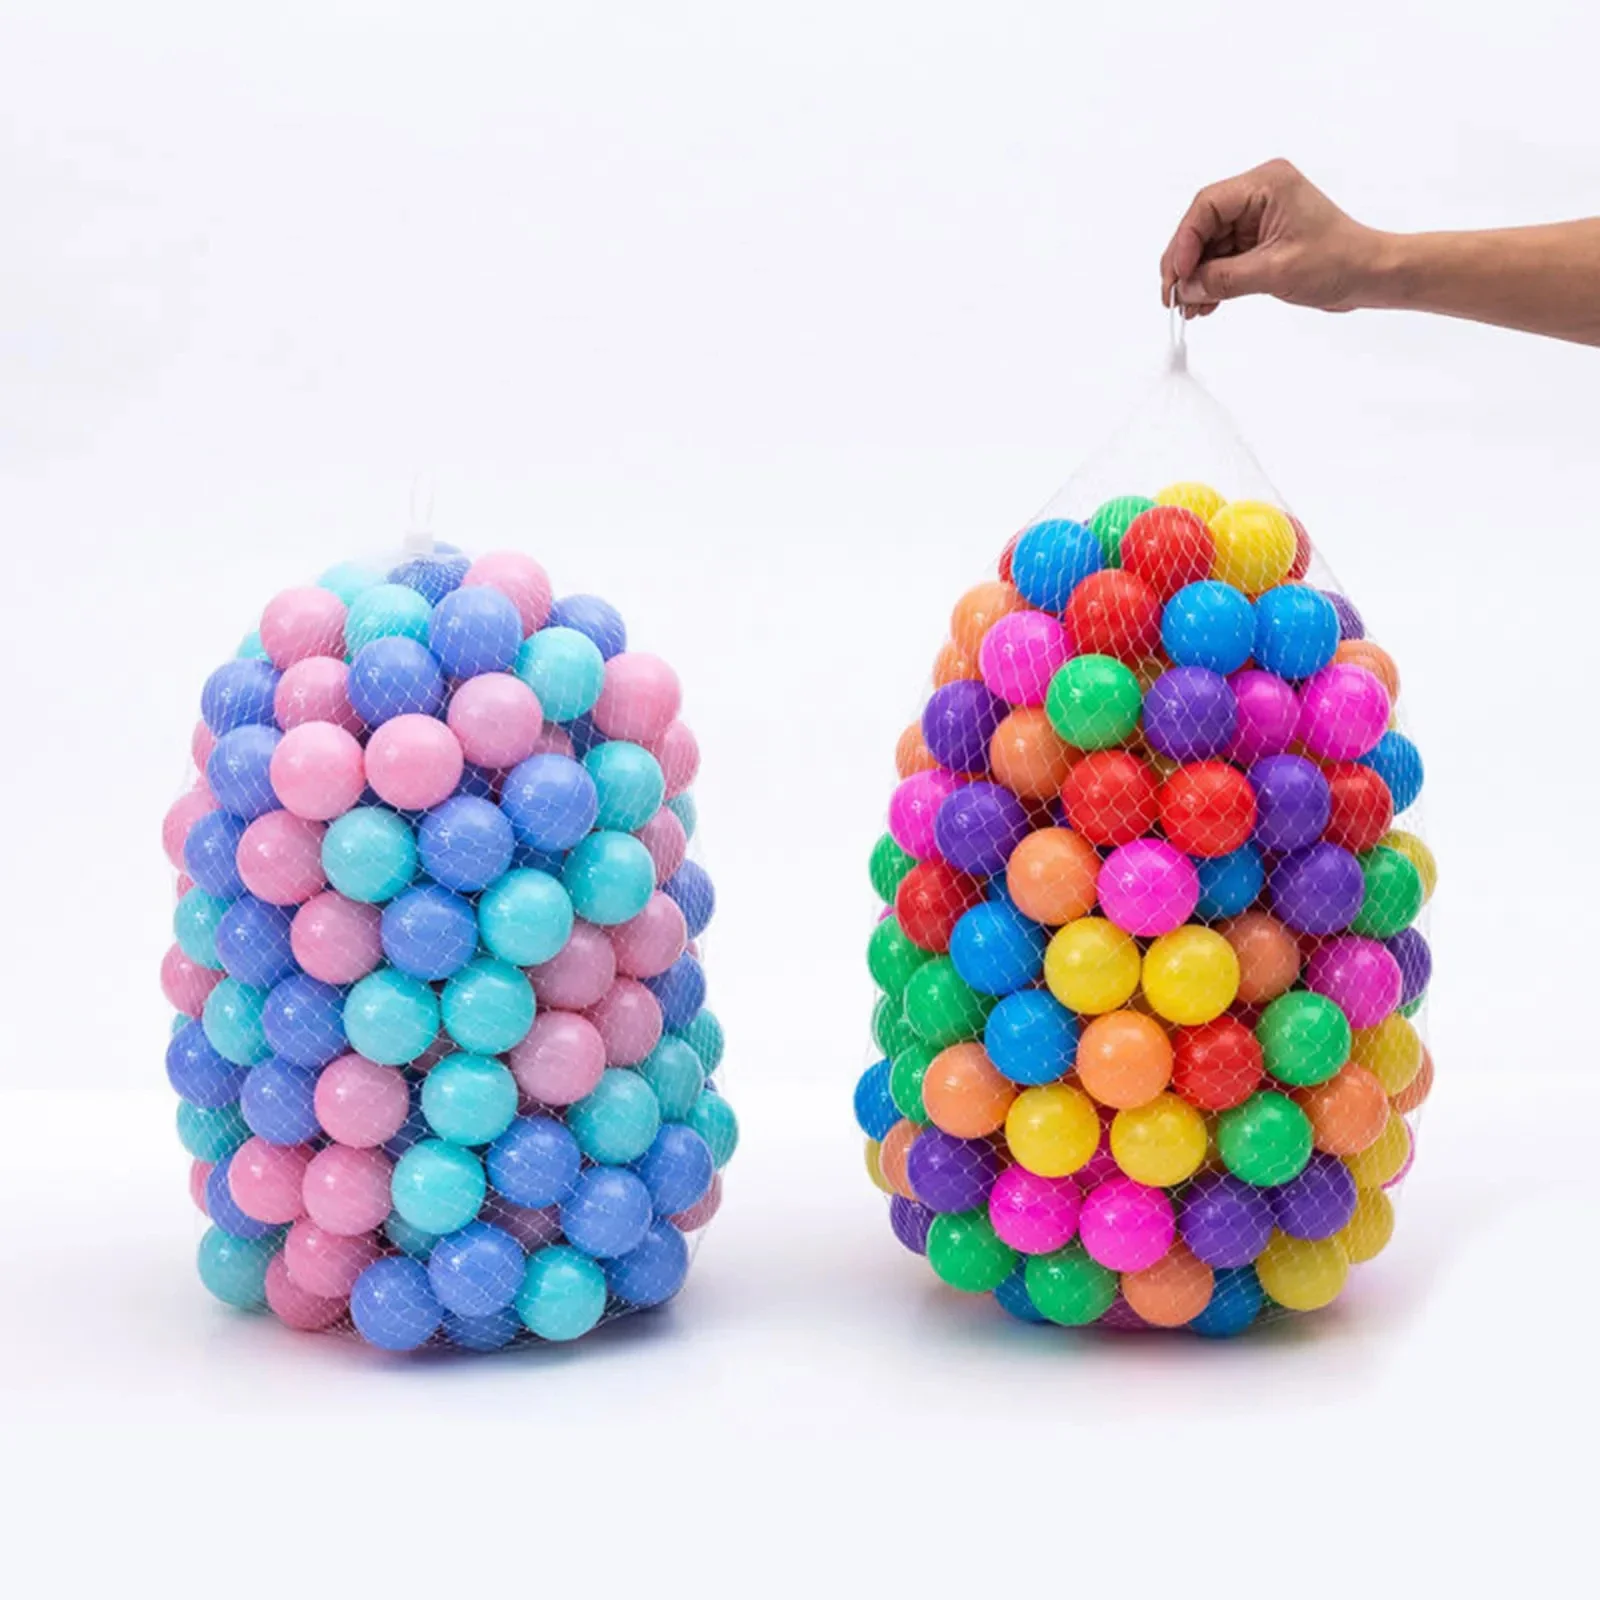 

5.5cm 50/100pcs Stress Air colorful Ball Food grade ocean Eco-Friendly baby color non-toxic tasteless children indoor outdoor to